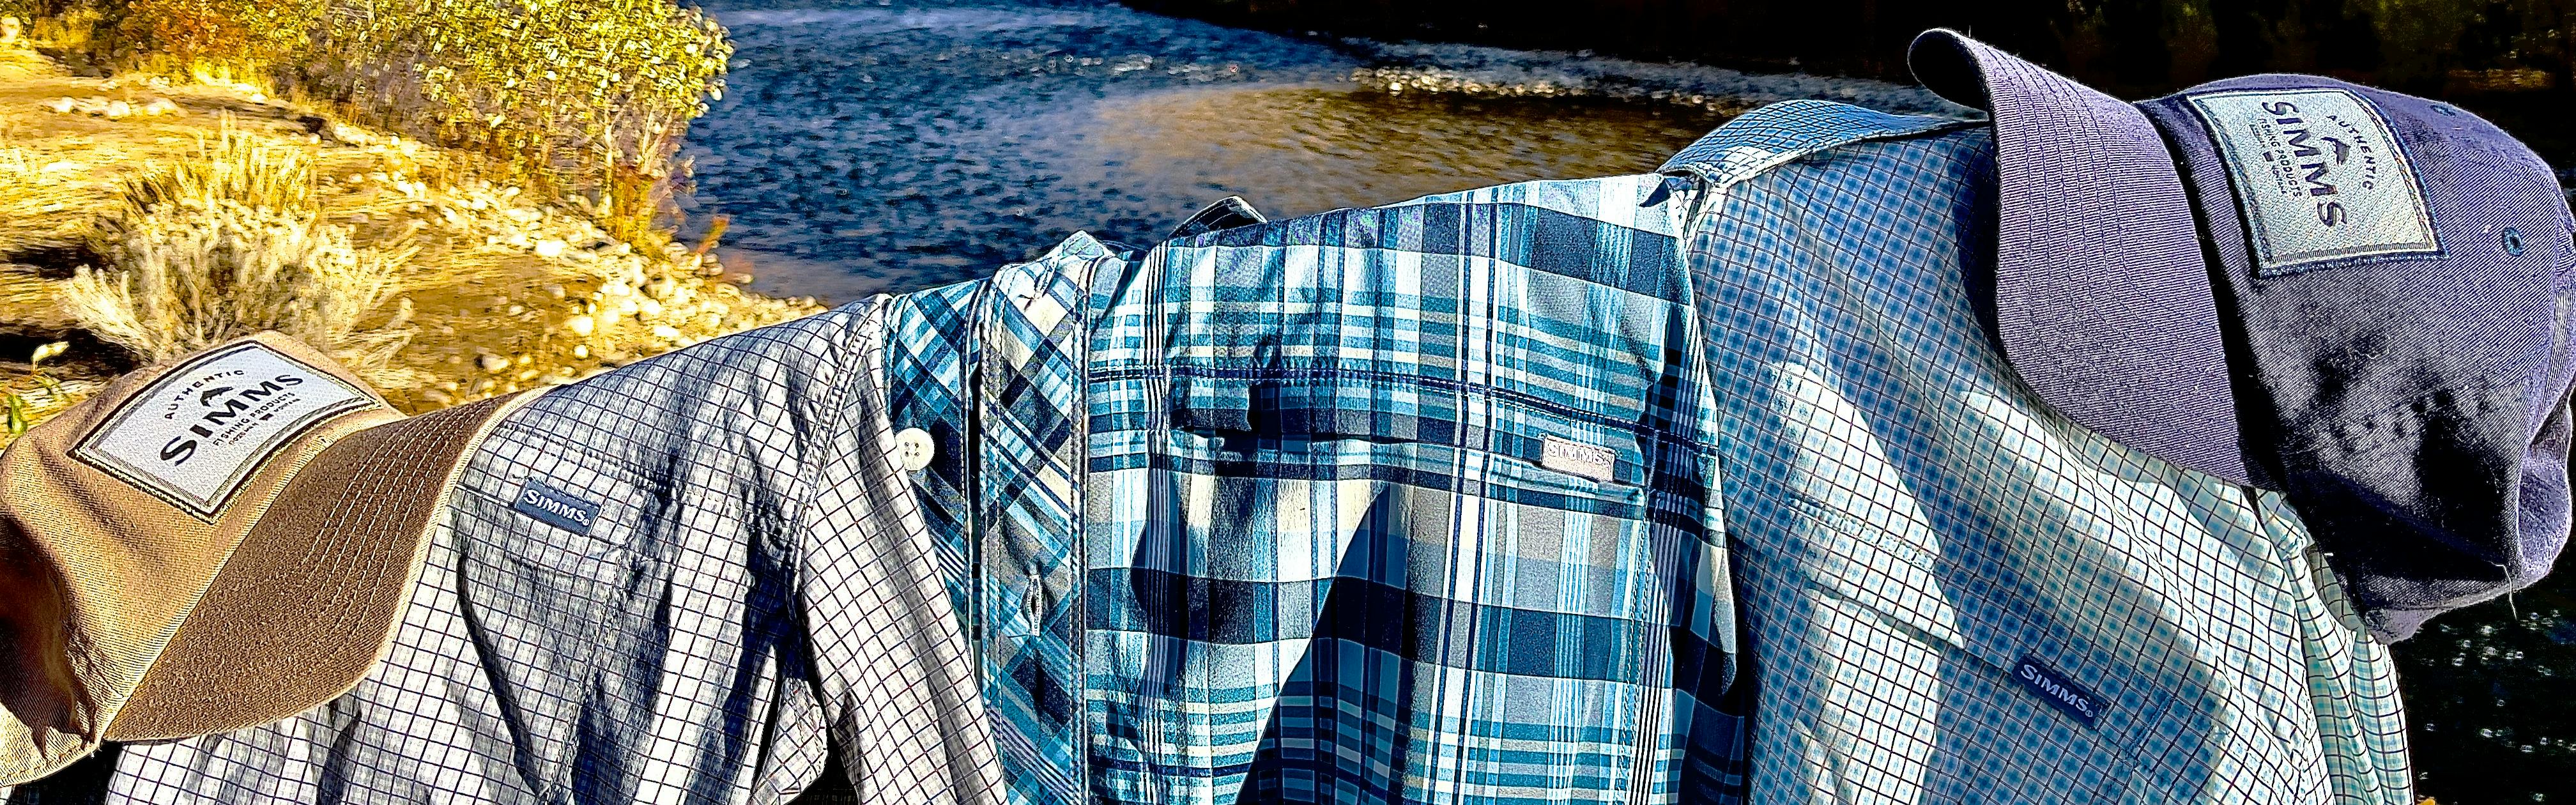 The 9 Most Recommended Fly Fishing Shirts